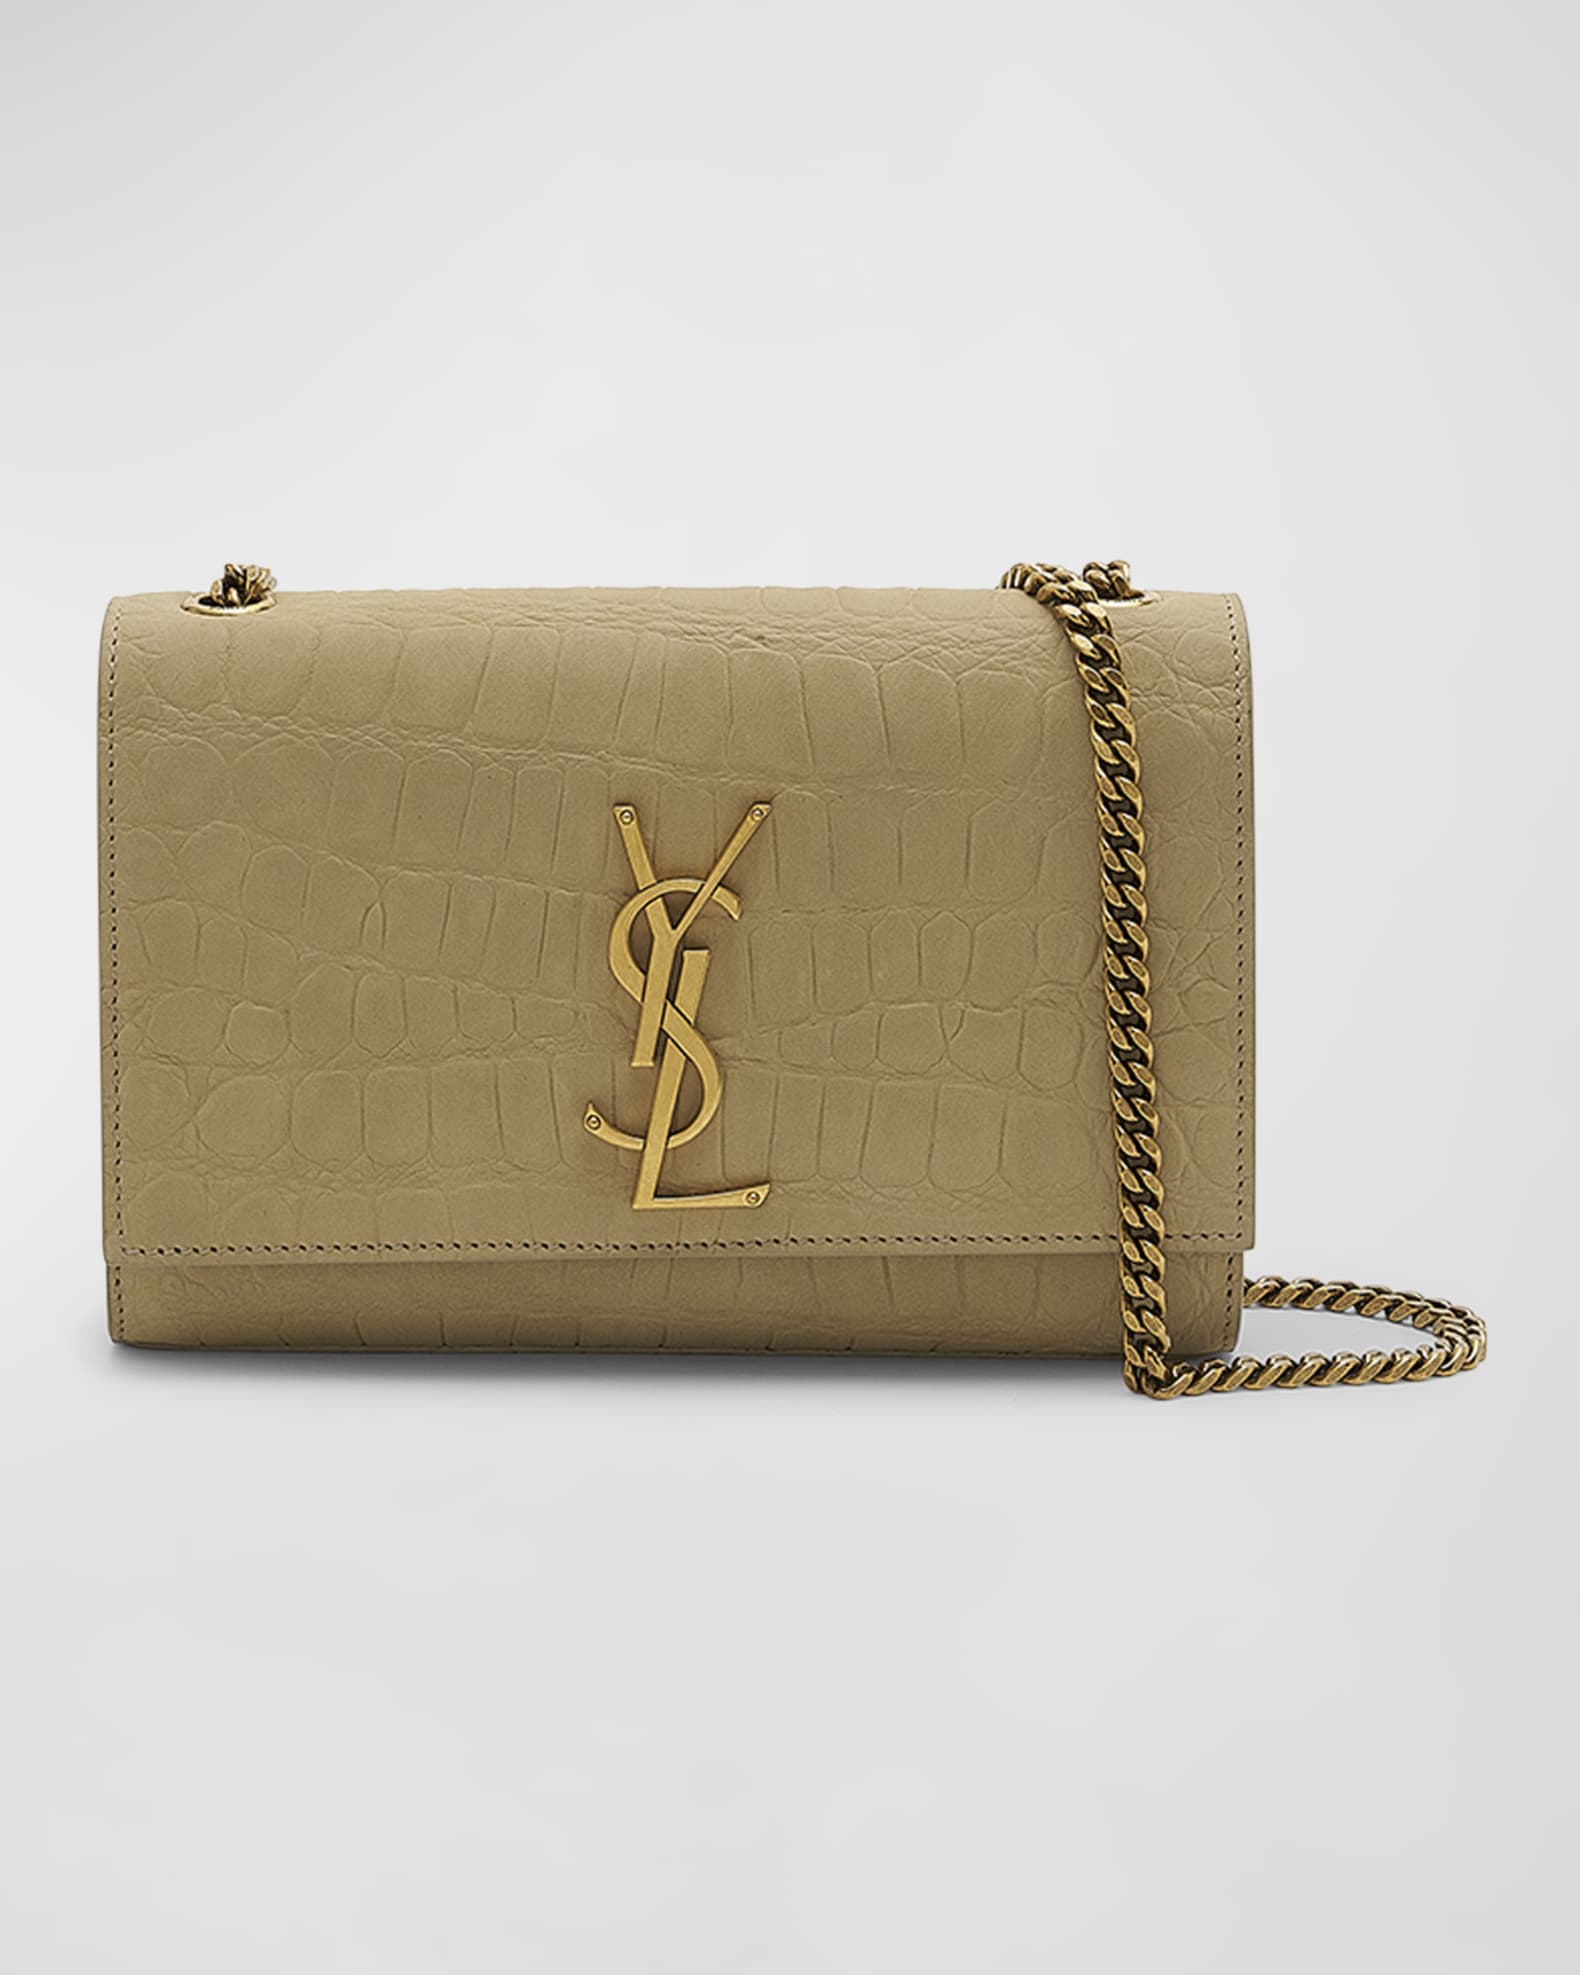 The 6 Best YSL Bags That Are Absolute Classics